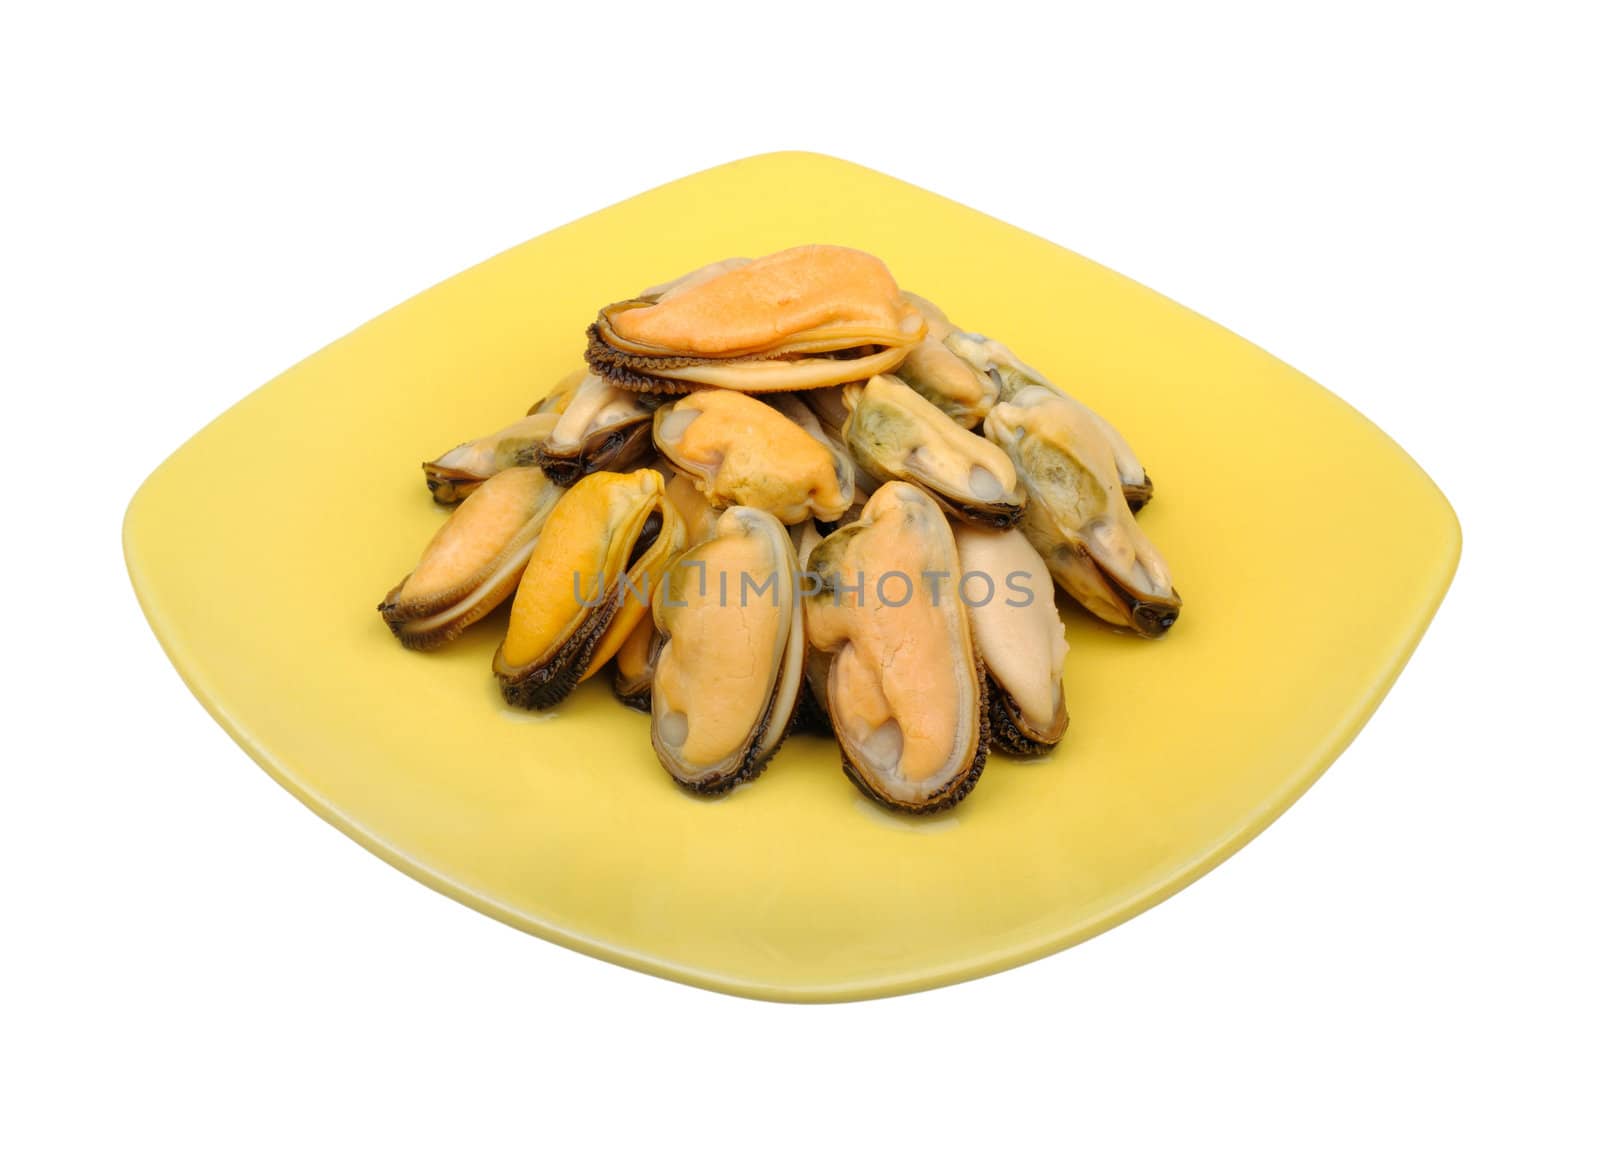 mussels on a plate isolated on white background